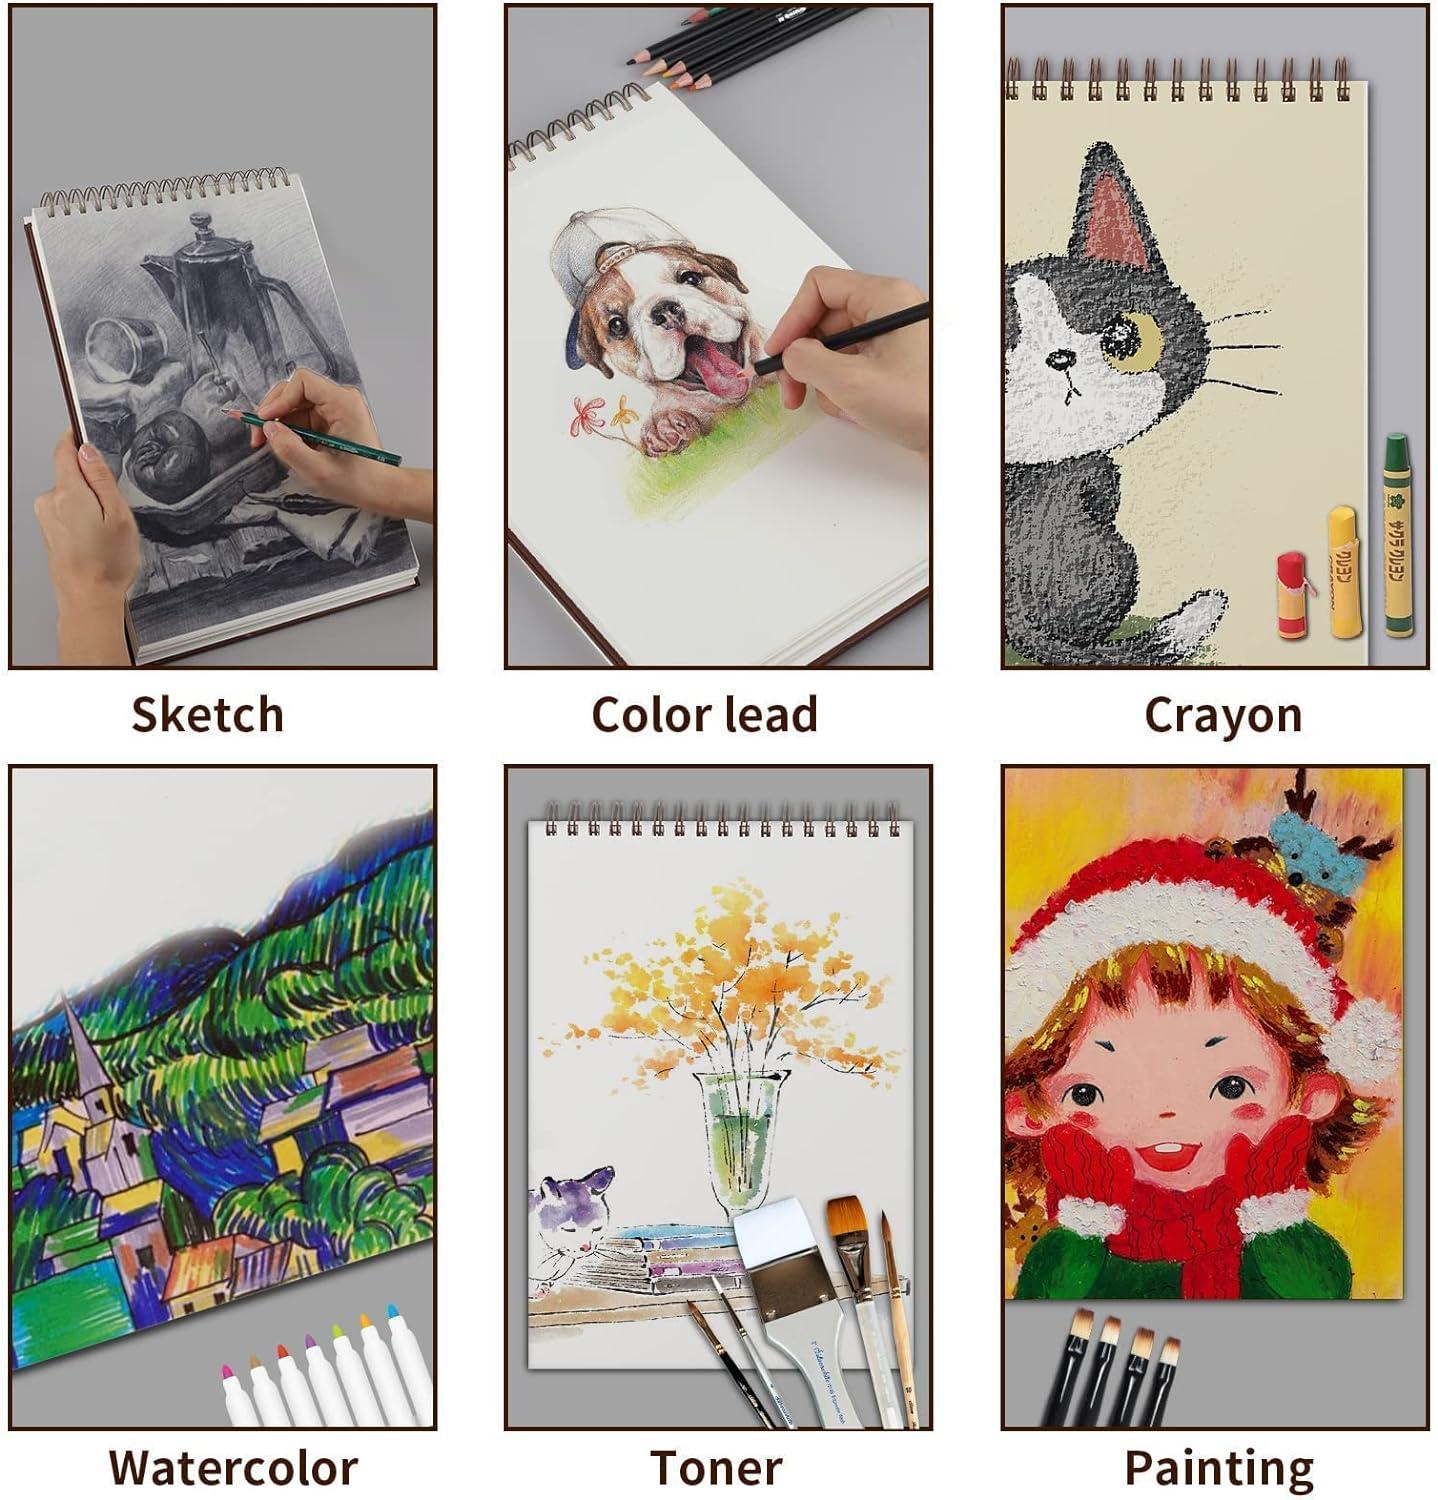  9 x 12 inches Drawing Sketch Book, 98lb/160g Sketchbook for  Adults Kids Beginners Artists, Art Drawing Book for Mixed Media, Top Spiral  Bound Drawing Pad, 2 Sketch pad Pack has 64